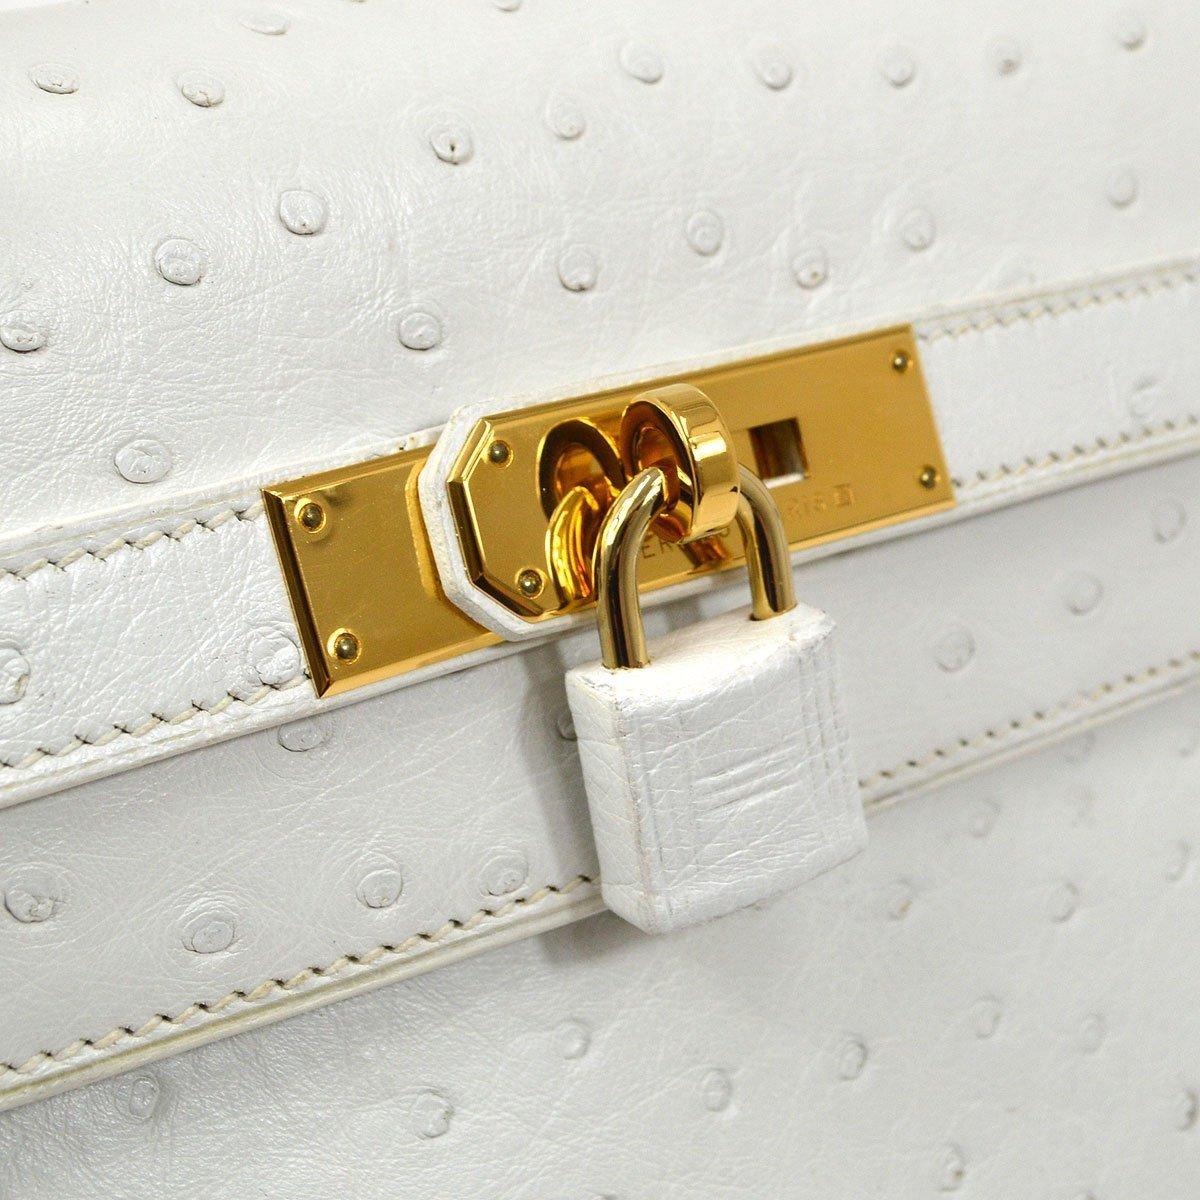 Pre-Owned Vintage Condition
From 1996 Collection
Ostrich Leather
Gold Tone Hardware
Leather Lining
Measures 14.25